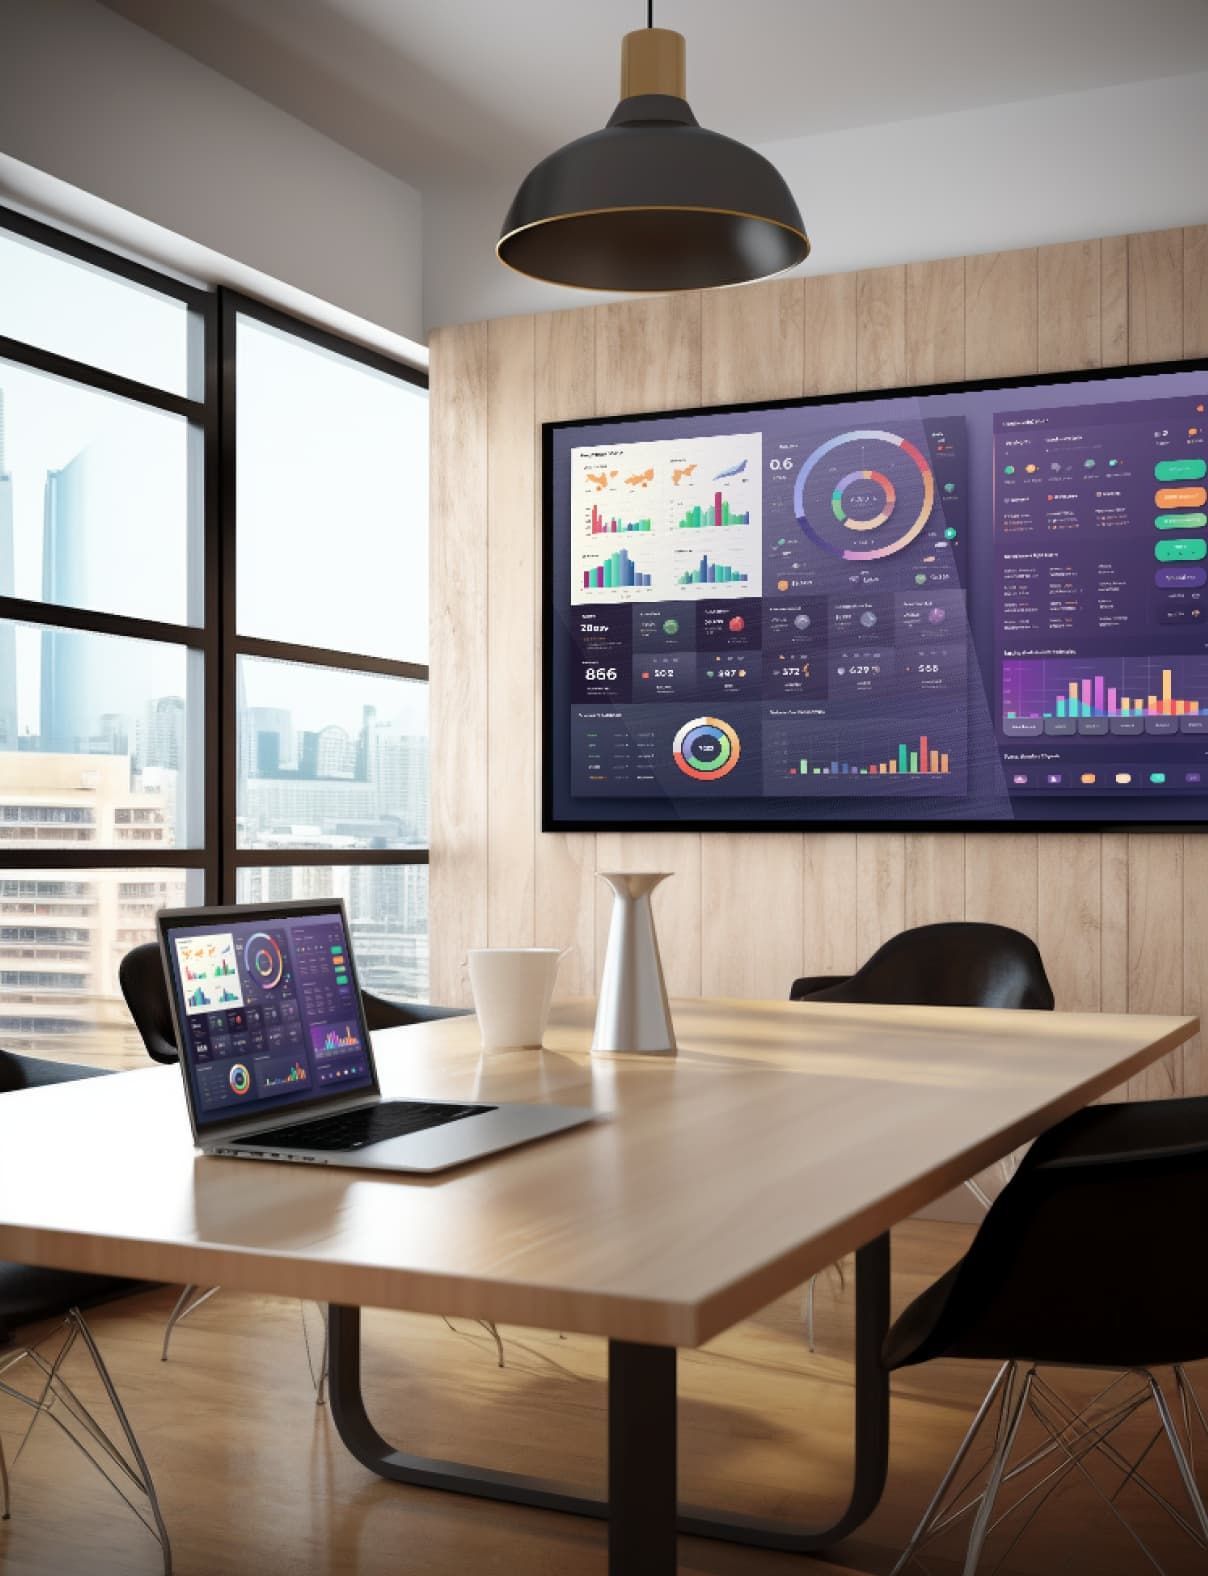 A digital signage screen in a conference room is displaying a TV dashboard. There is a laptop on the table that is using screen mirroring software to mirror the dashboard on the TV dashboard. UI elements of Fugo's digital signage software are overlain over the photo.